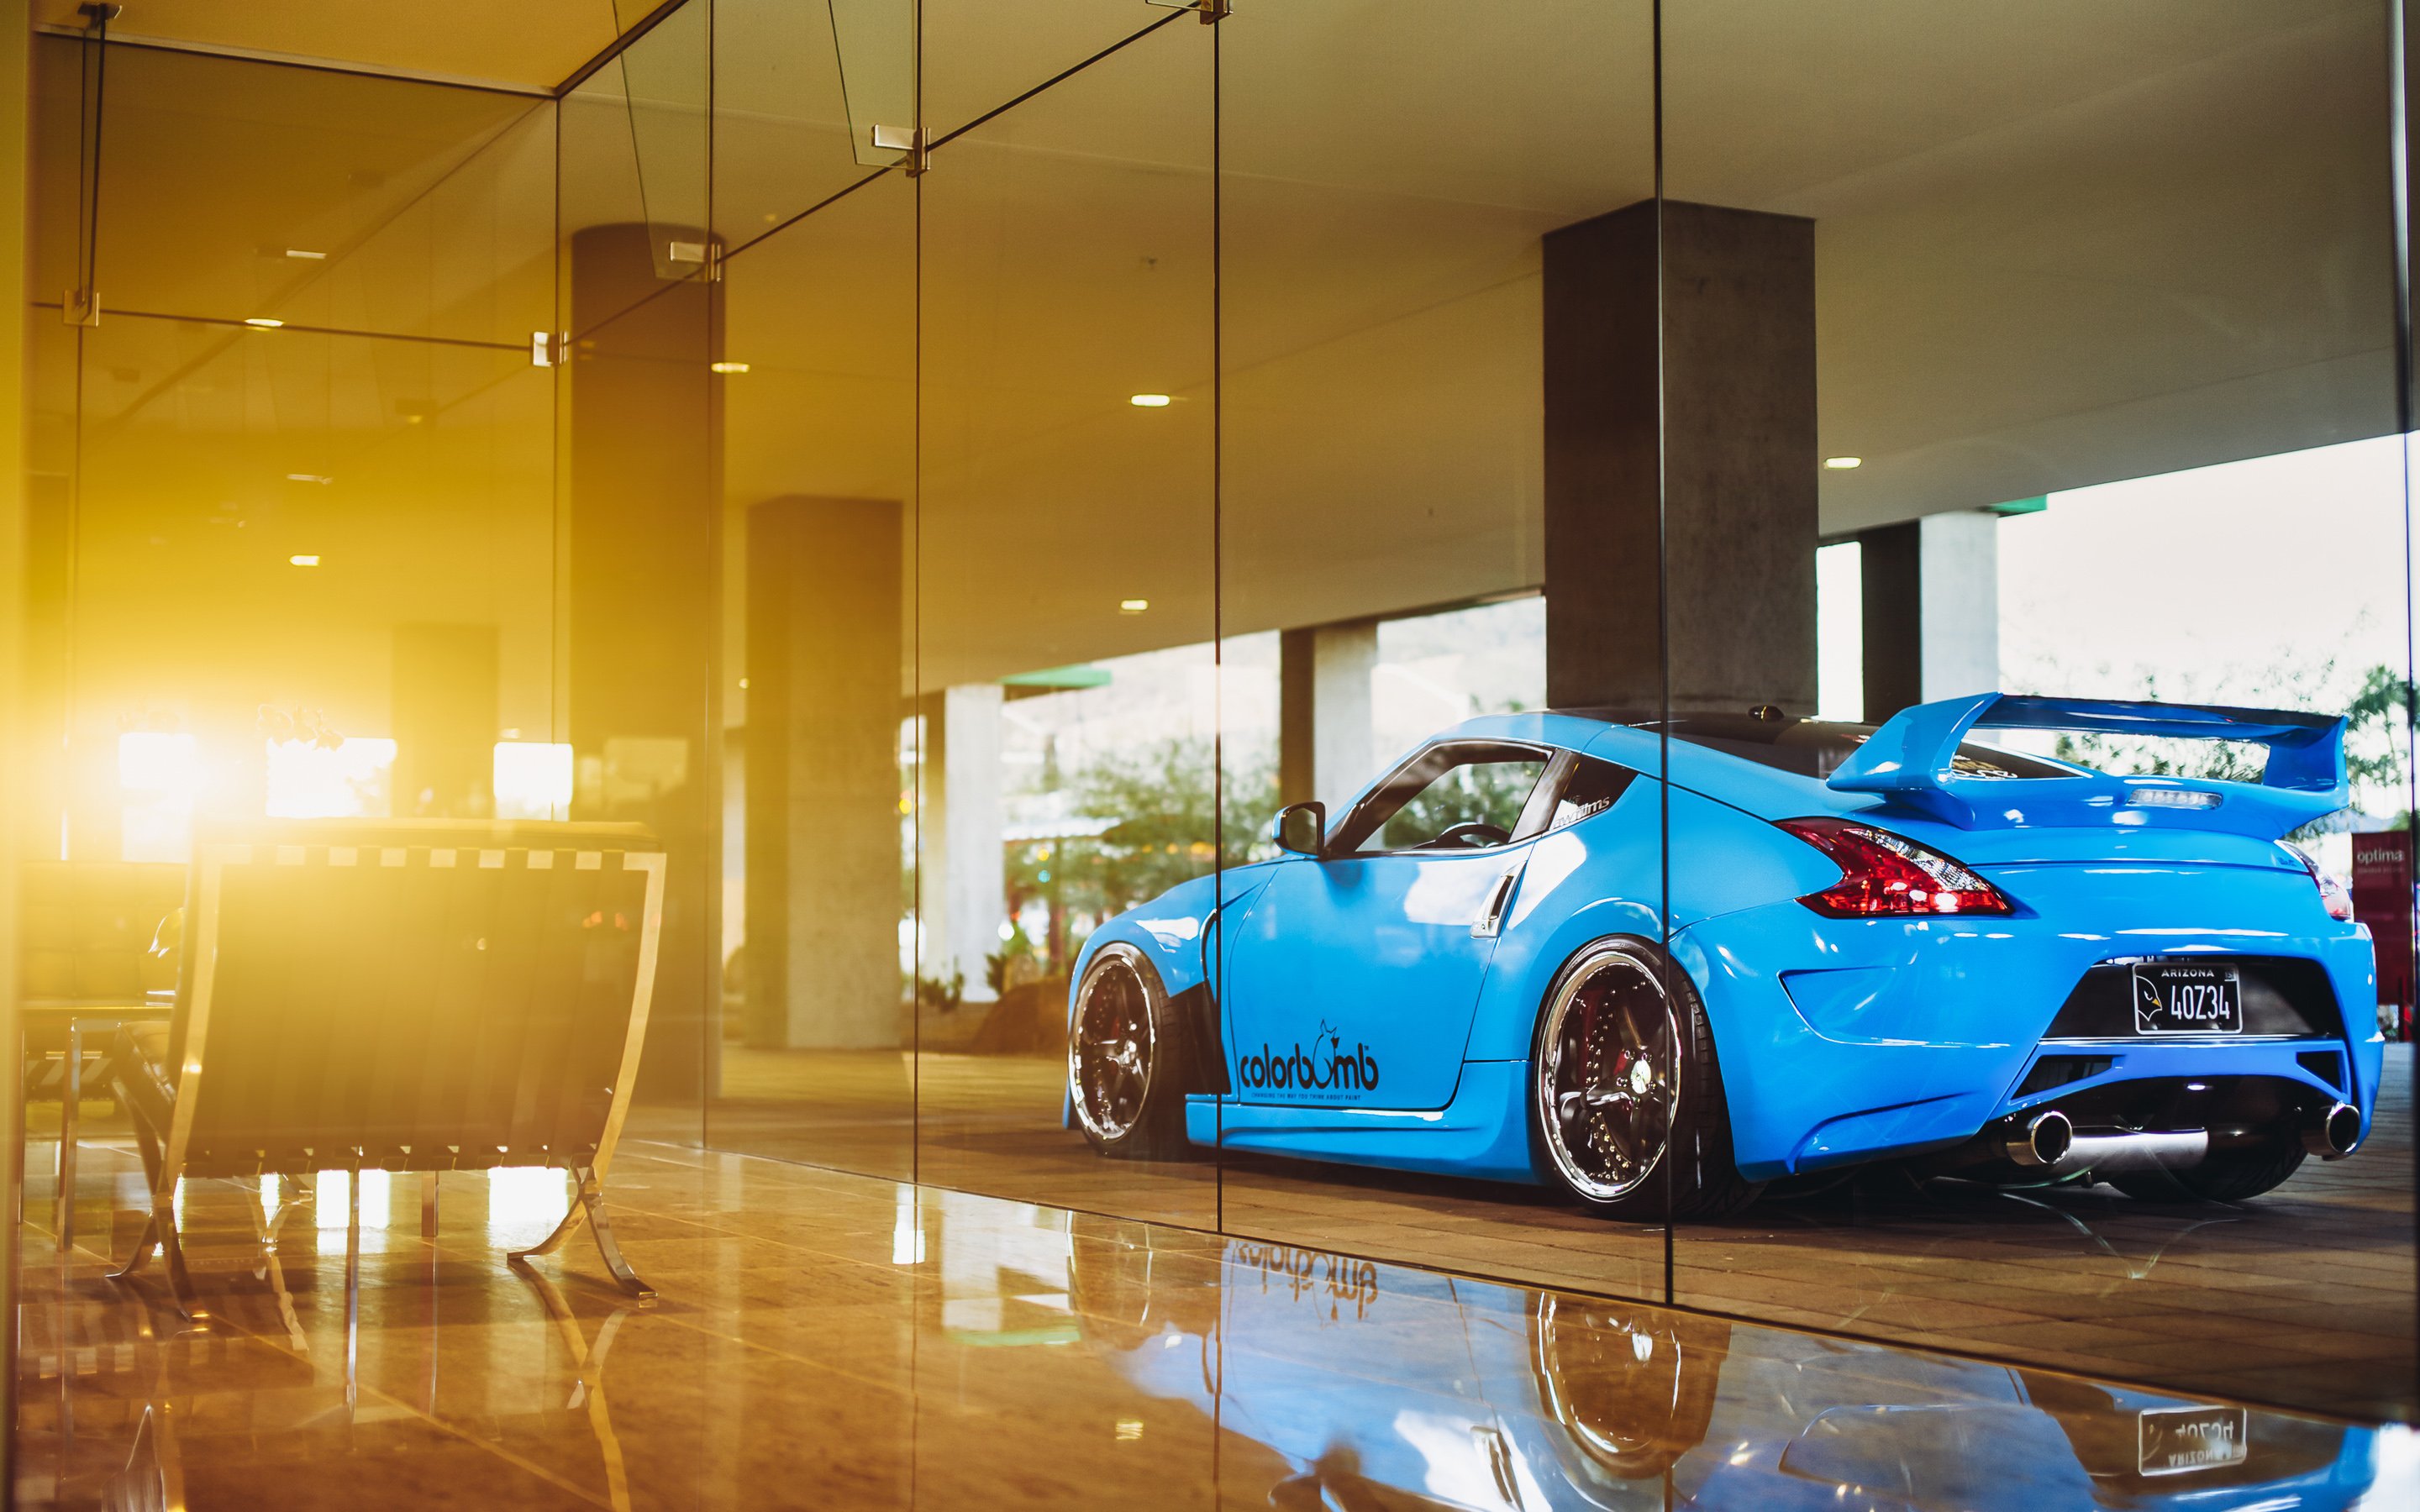 370z 4k Wallpapers For Your Desktop Or Mobile Screen Free And Easy Images, Photos, Reviews